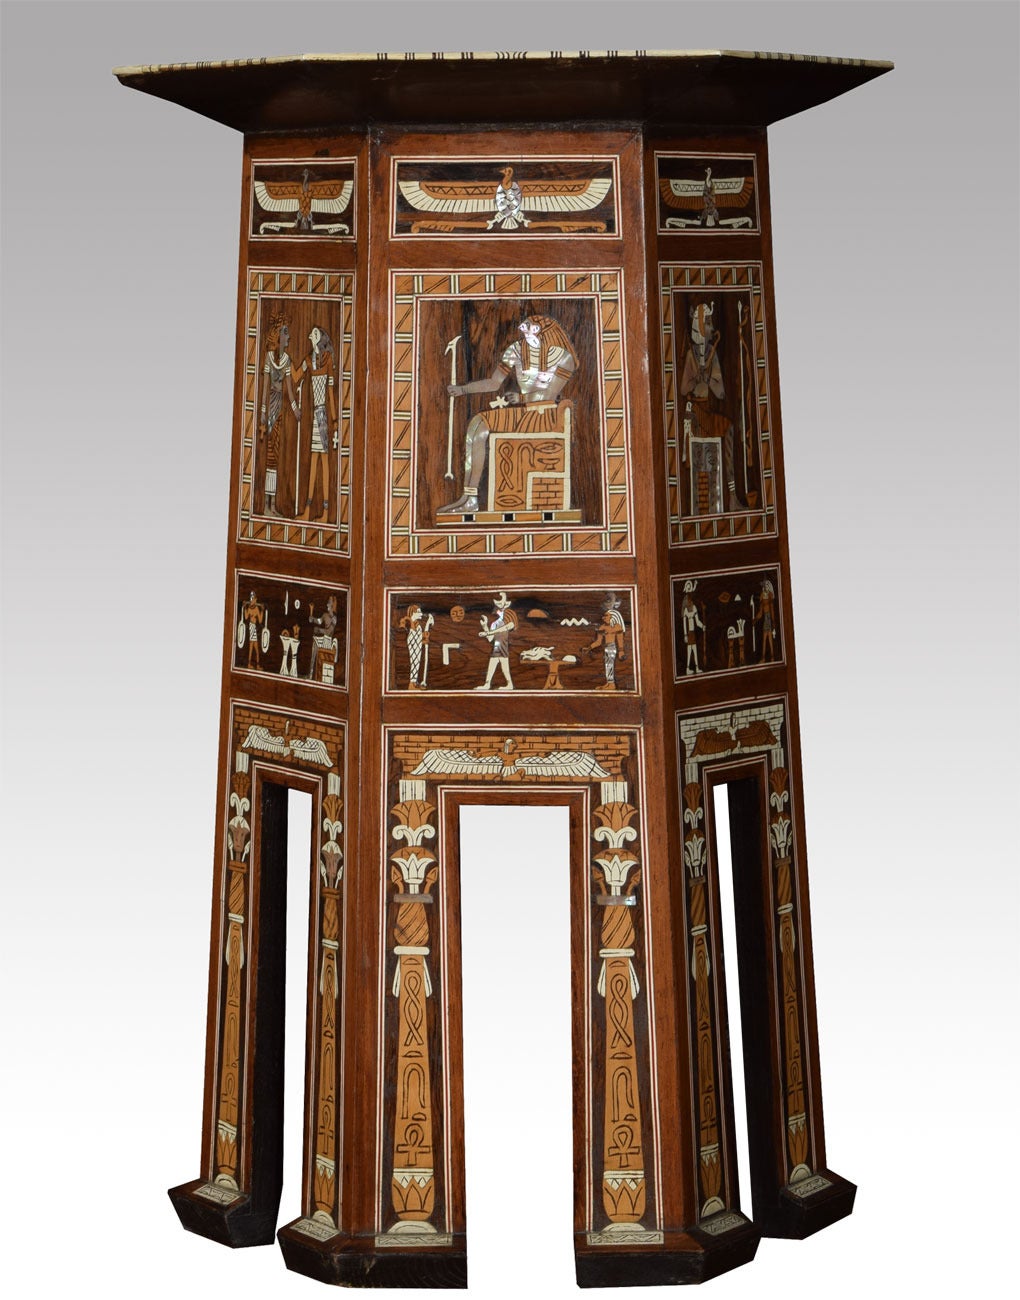 One of kind 19th century Egyptian hexagonal inlaid pedestal table inlaid with mother of pearl, tortoise and ebony the profusely inlaid top above swept supports, with typical Egyptian depictions, set within an intertwining lotus